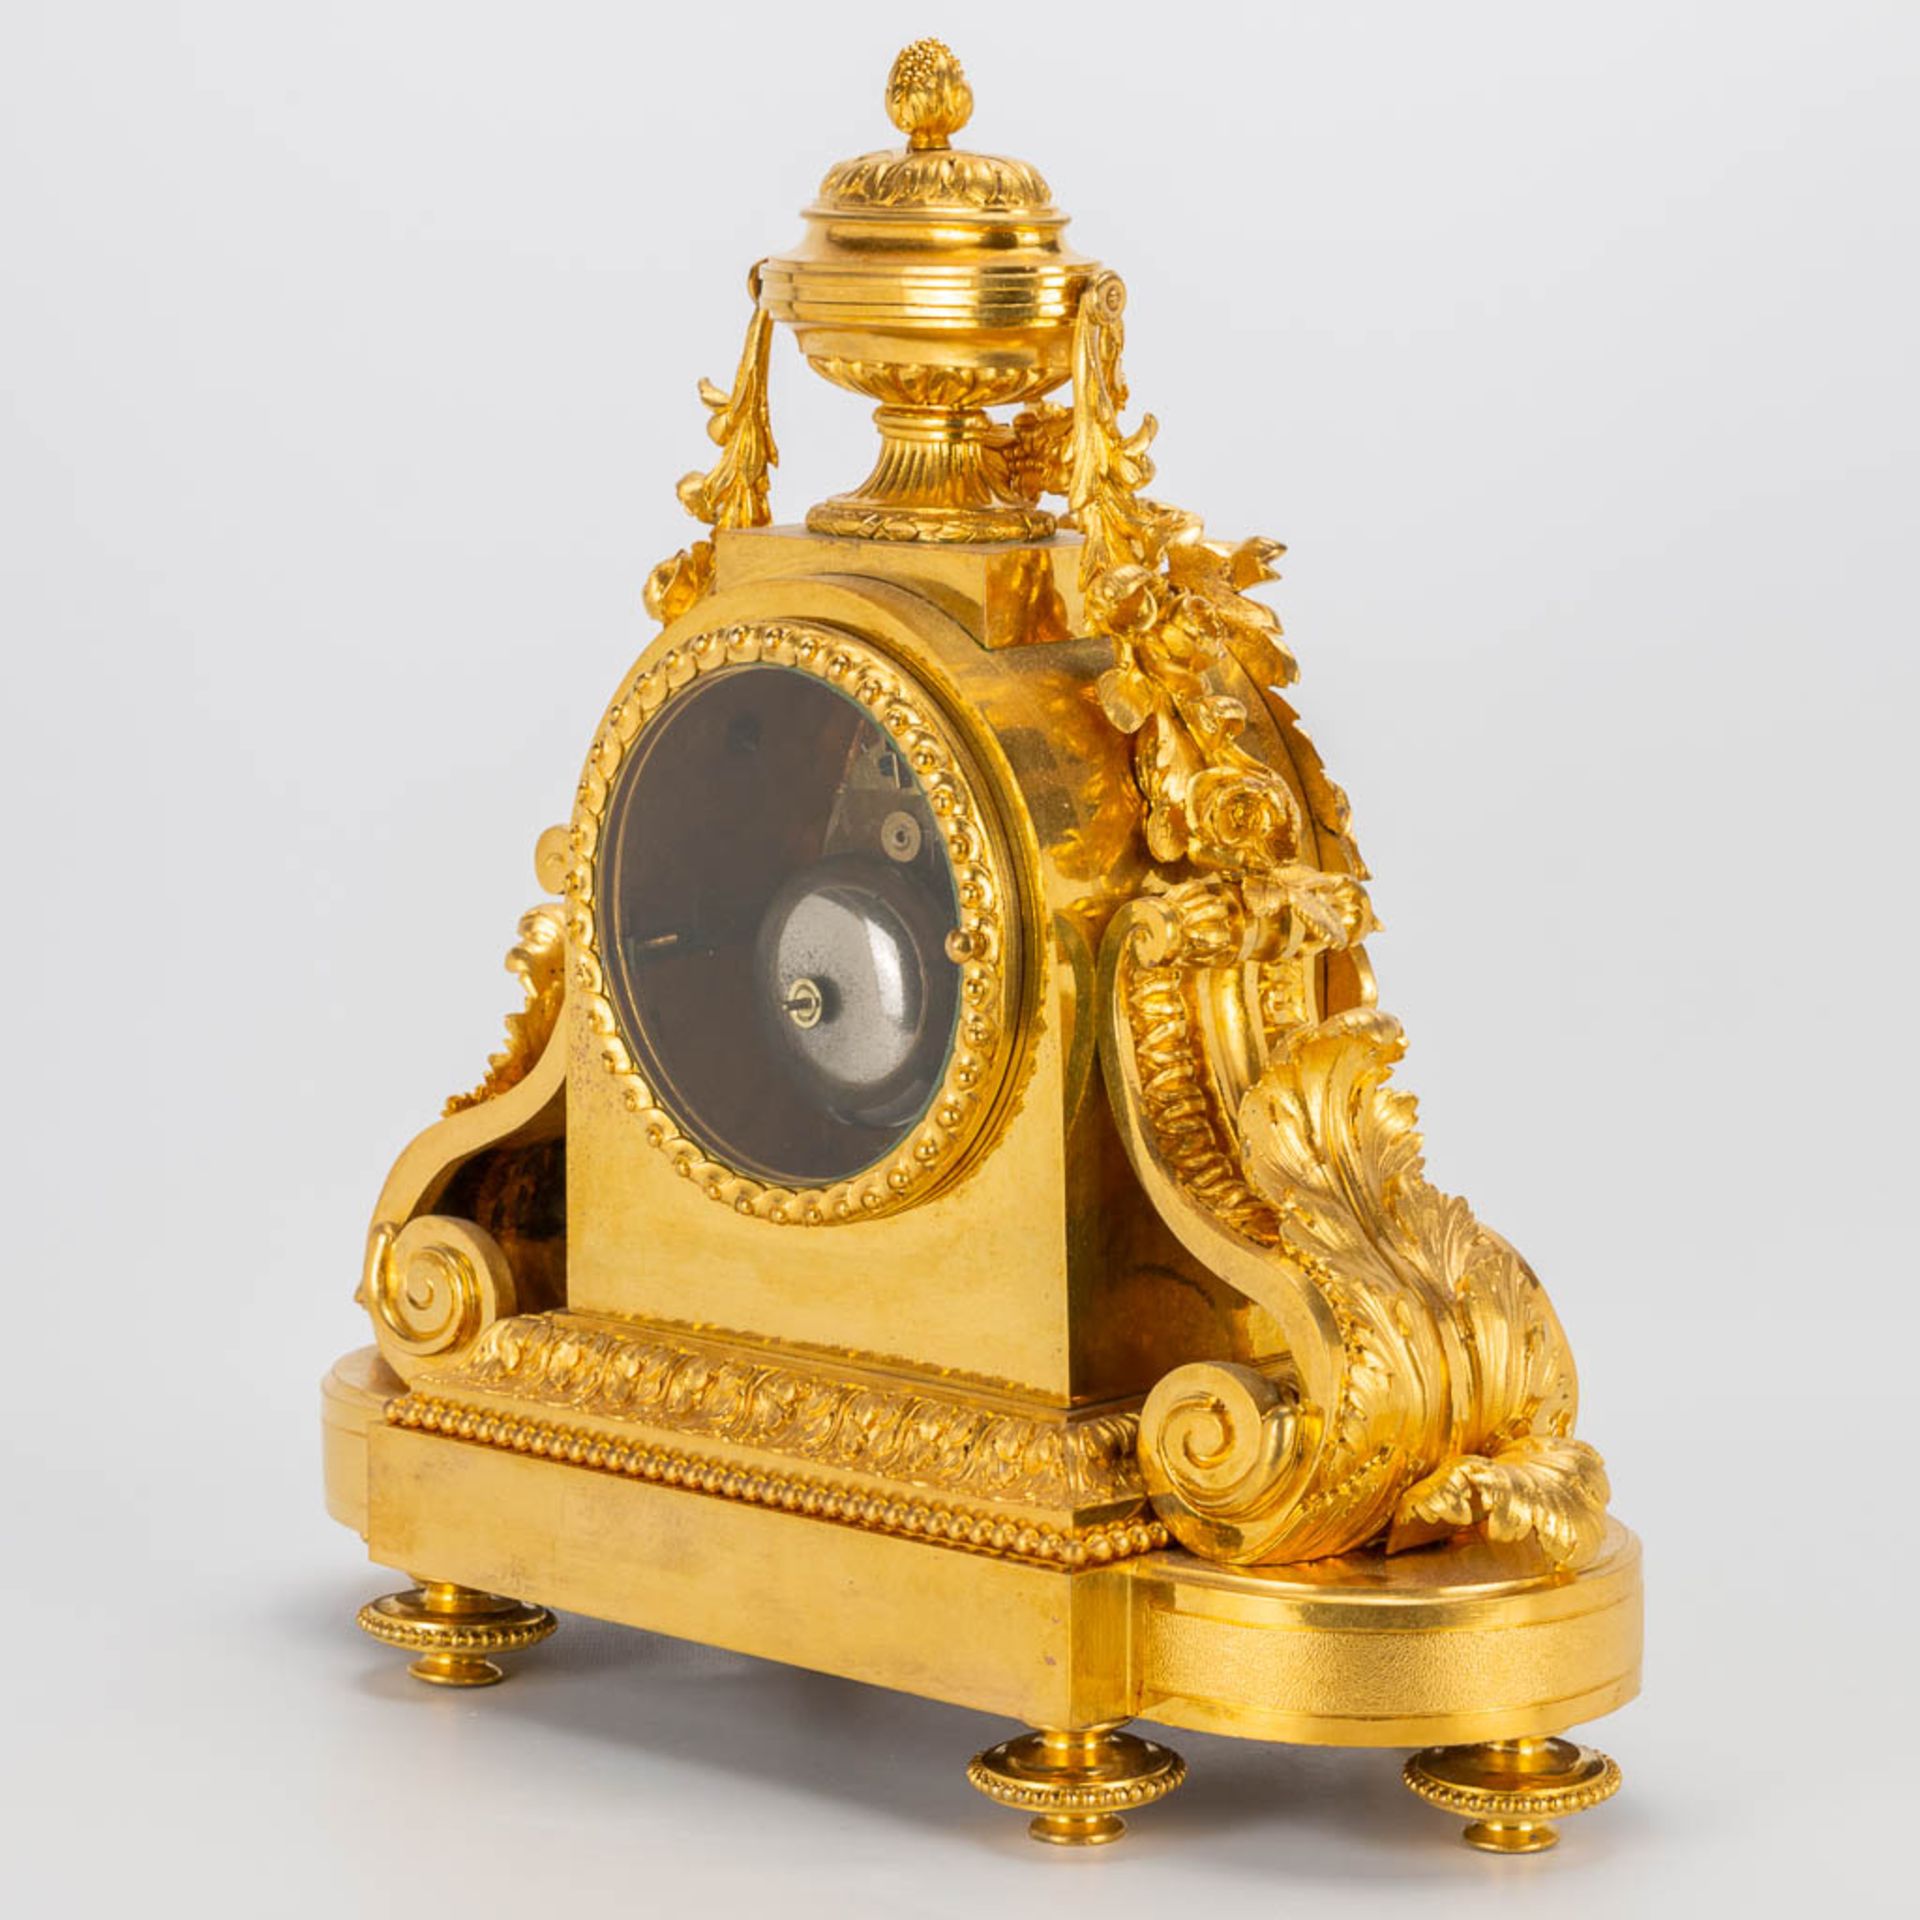 A bronze ormolu table clock made in Louis XVI style. 19th century. (15 x 41 x 42 cm) - Image 3 of 20